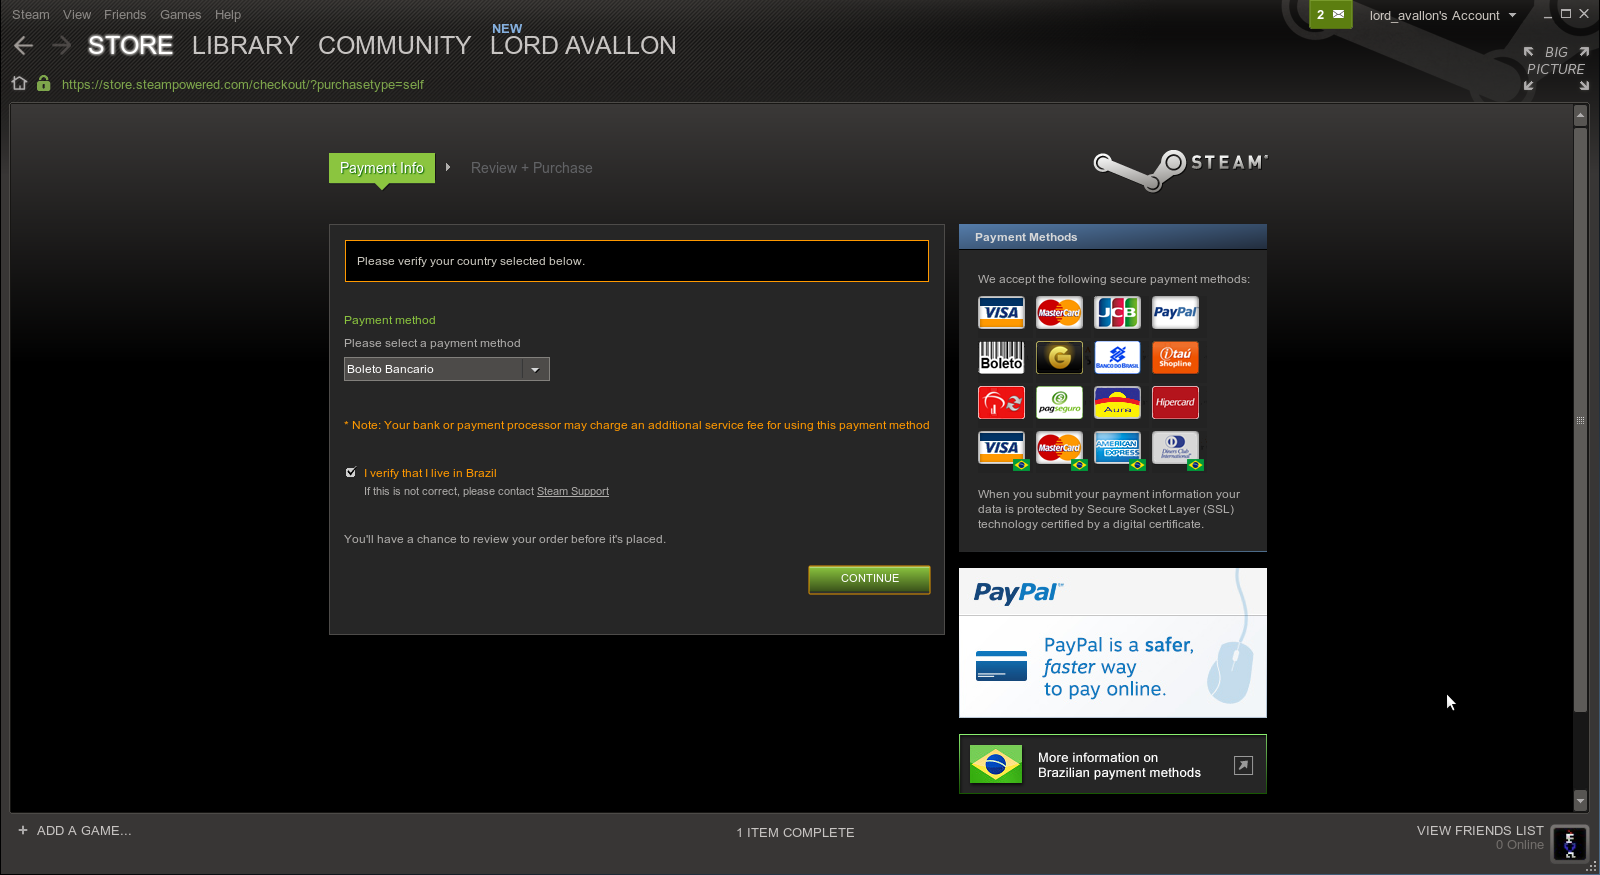 Checkbox on accepting steam subscriber agreement is backwards 